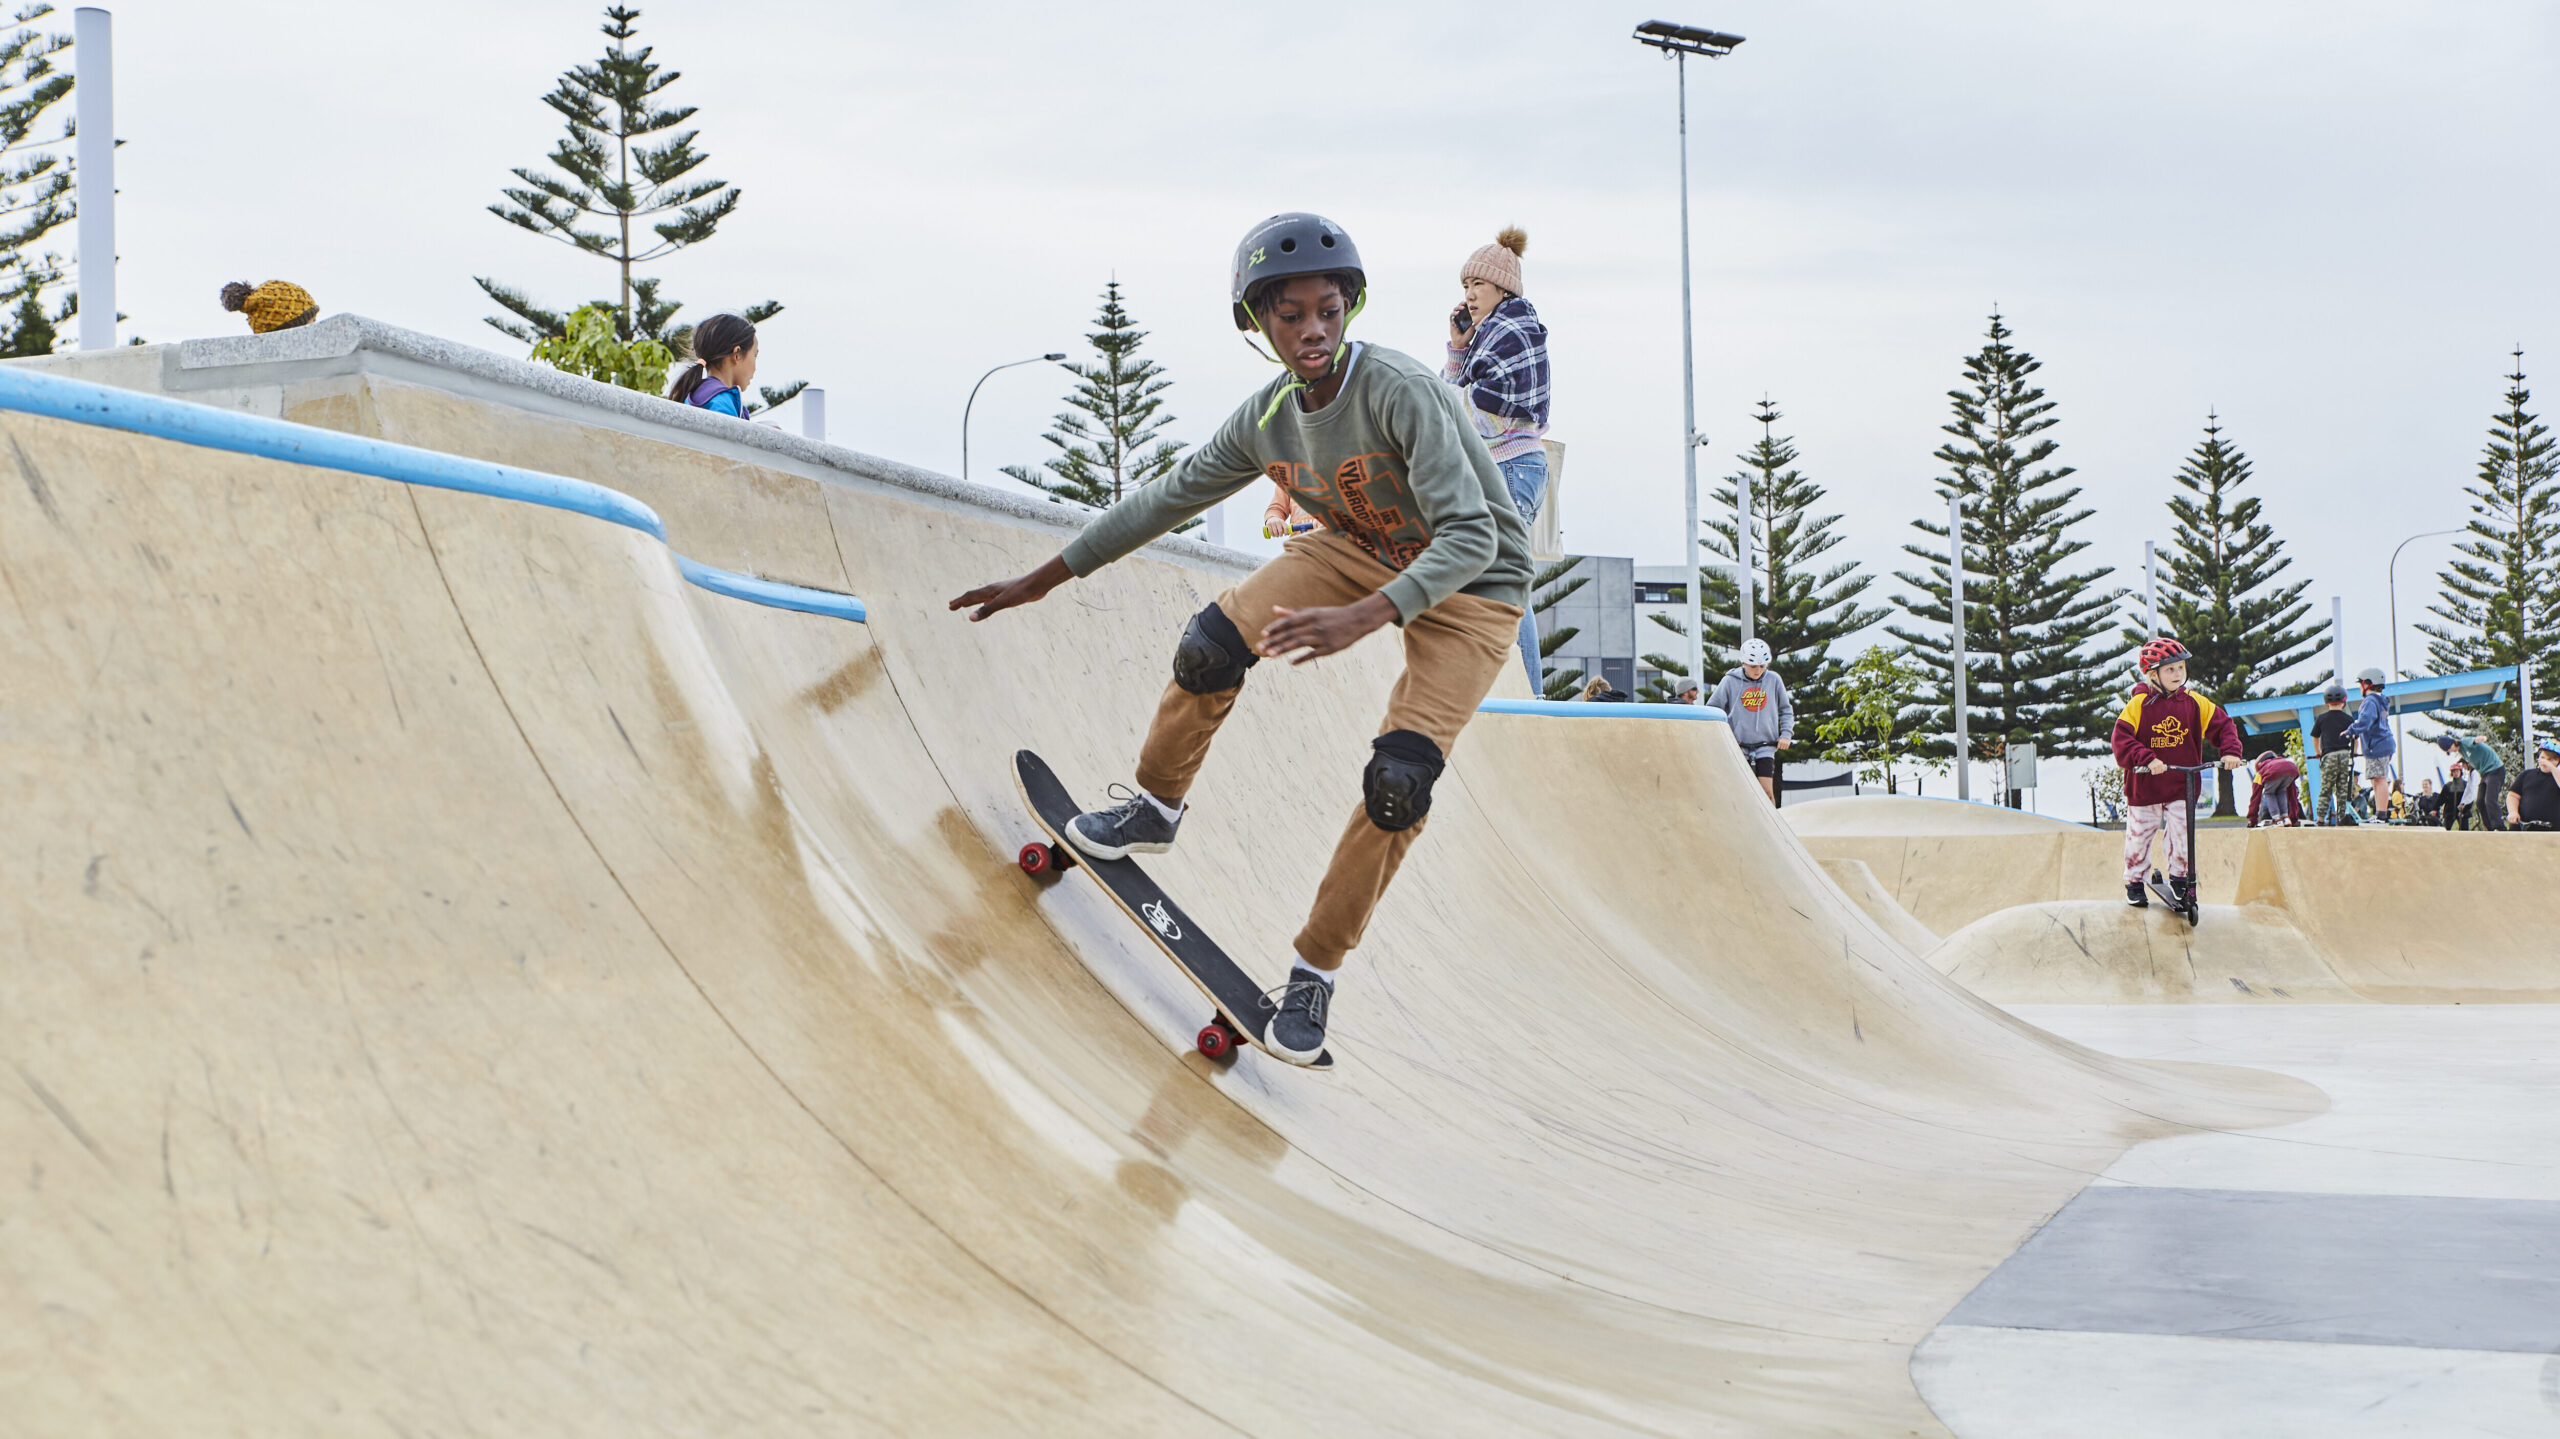 Youth Woola Boola happening at Koolambidi Woola in April. Skateboarder pictured in the skate bowl.